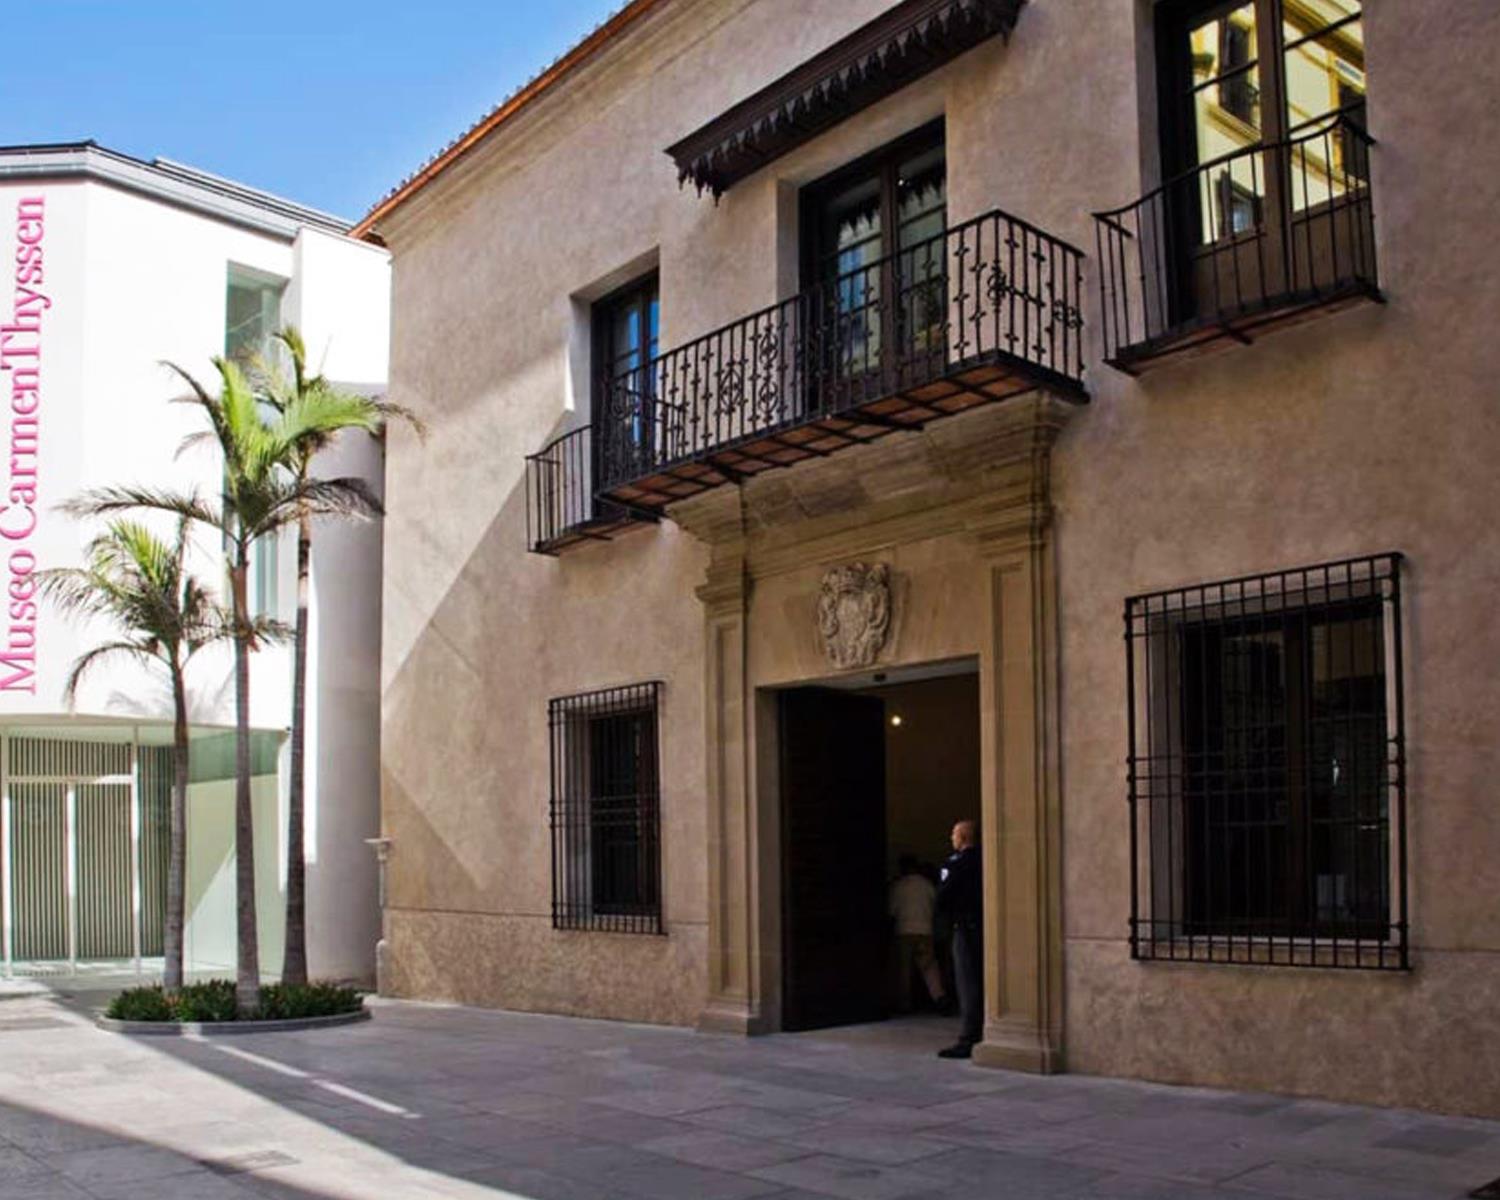 Guided tour of the Carmen Thyssen Museum